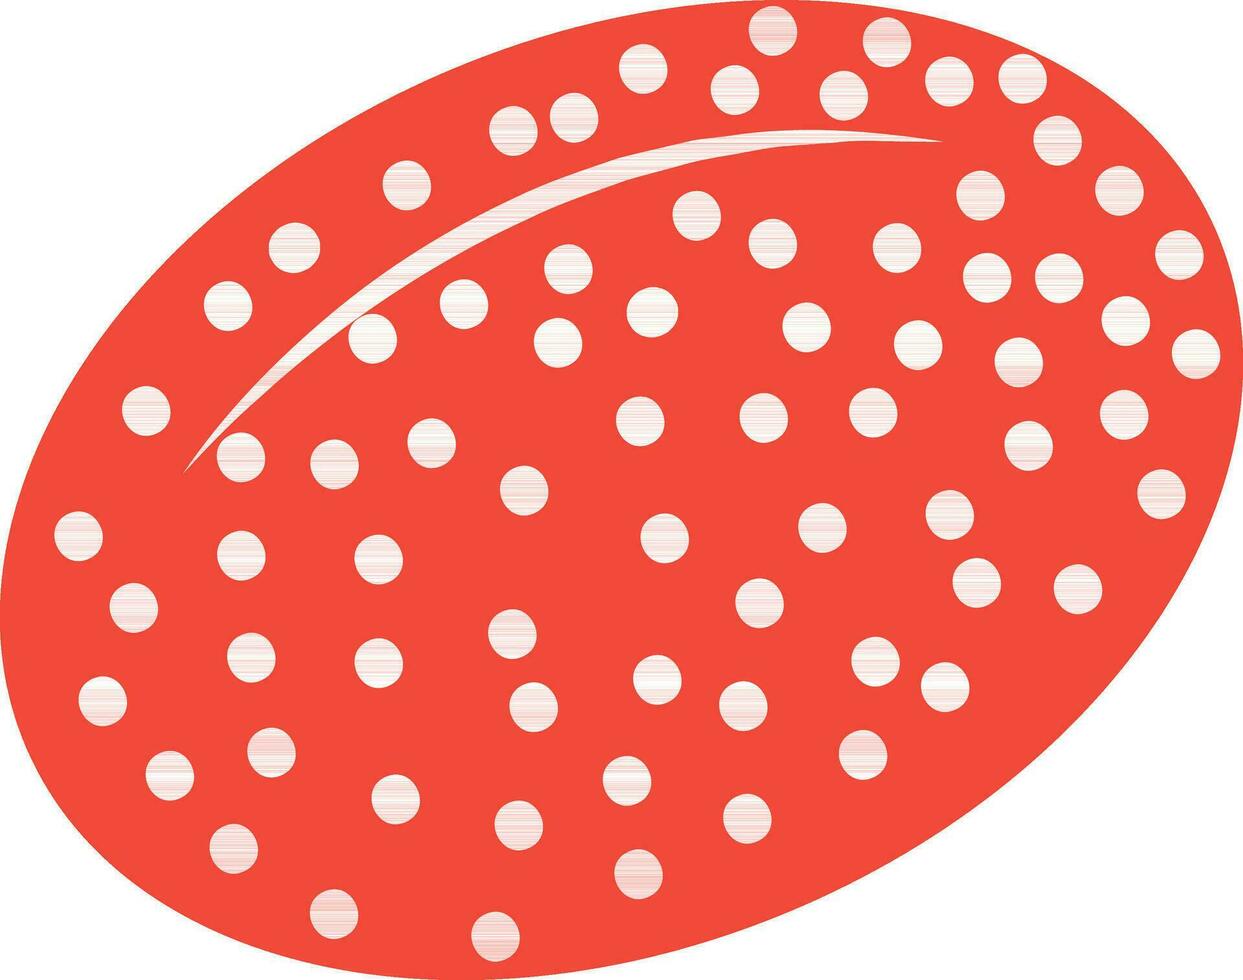 Oval Shape Candy Icon In Red And White Color. vector